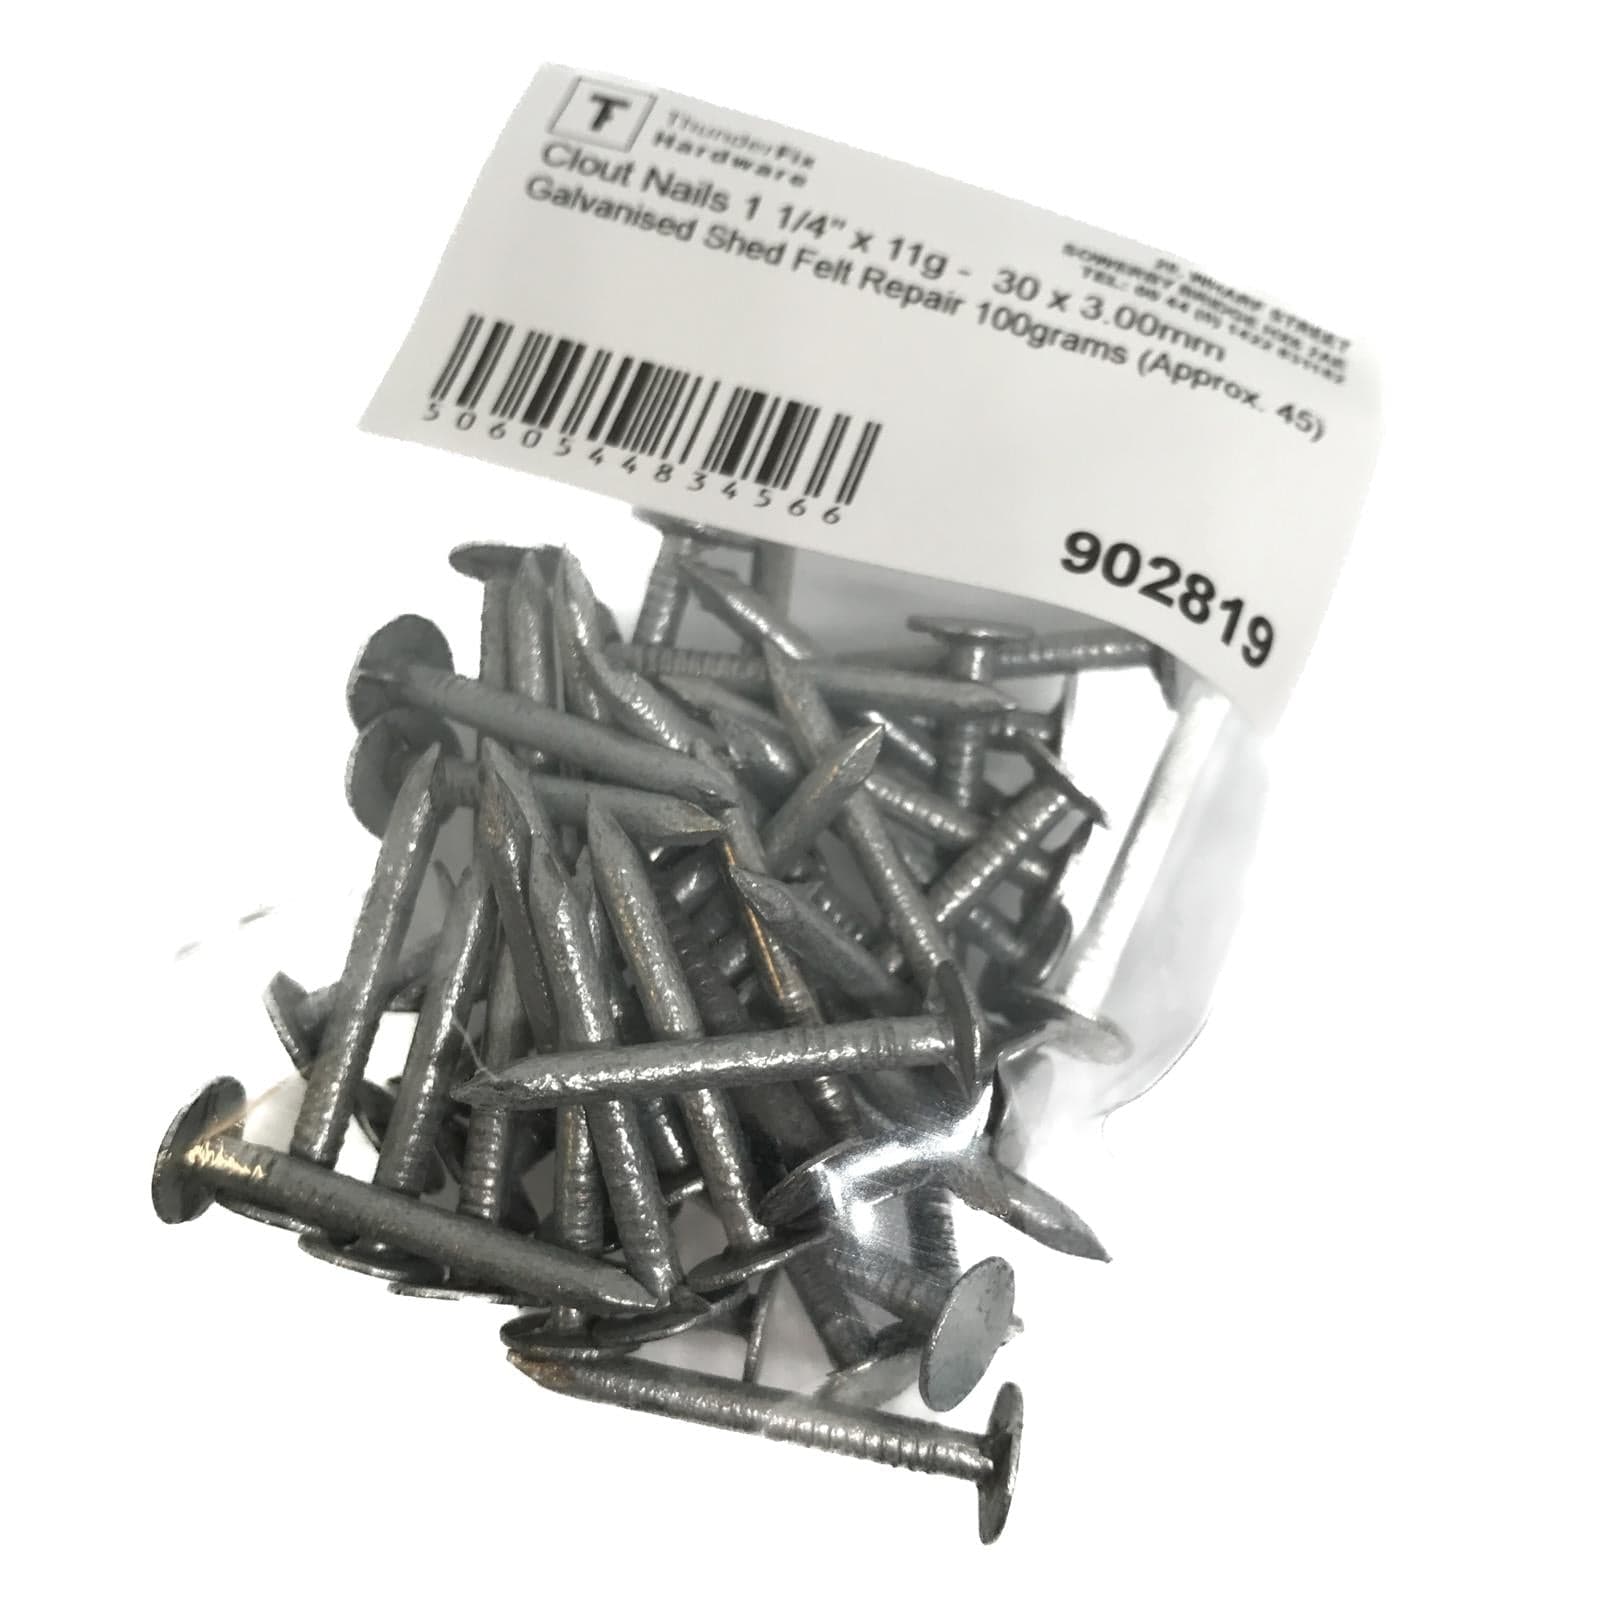 Clout Nails 1 1/4" x 11g -  30 x 3.00mm Galvanised Shed Felt Repair 100grams (Approx. 45) Service Item Thunderfix 902819